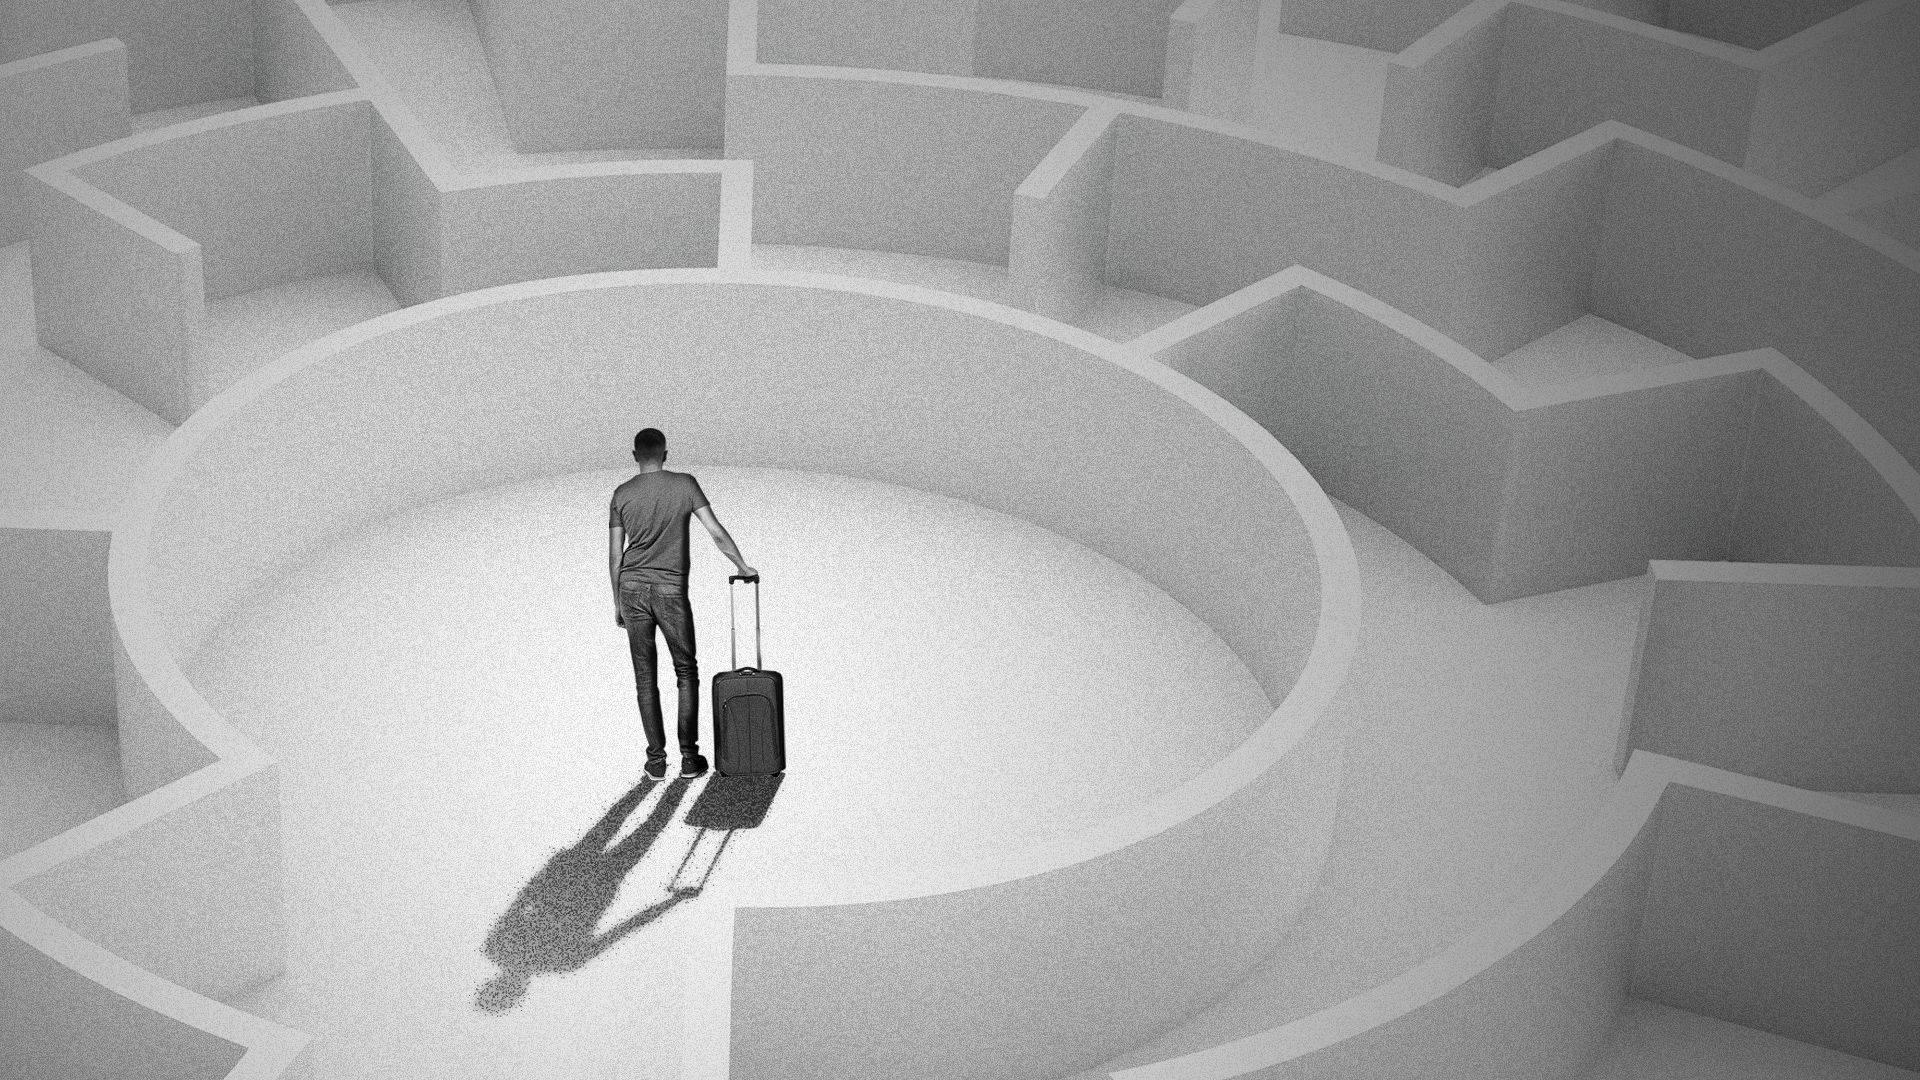 Illustration of a man holding a suitcase in the center of a maze.  